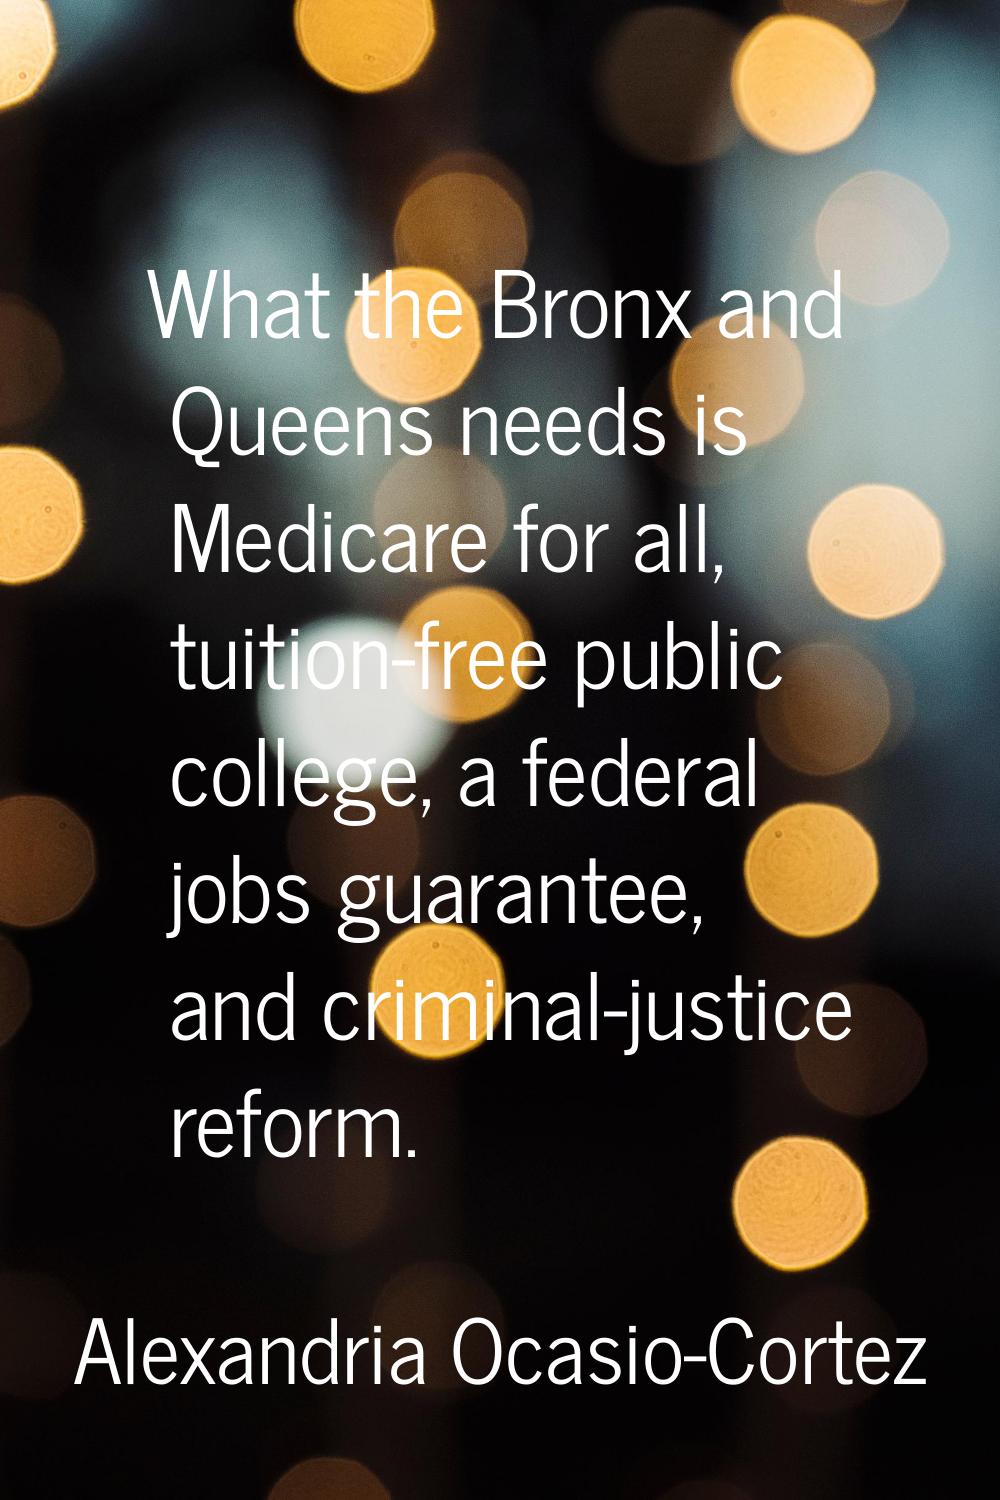 What the Bronx and Queens needs is Medicare for all, tuition-free public college, a federal jobs gu